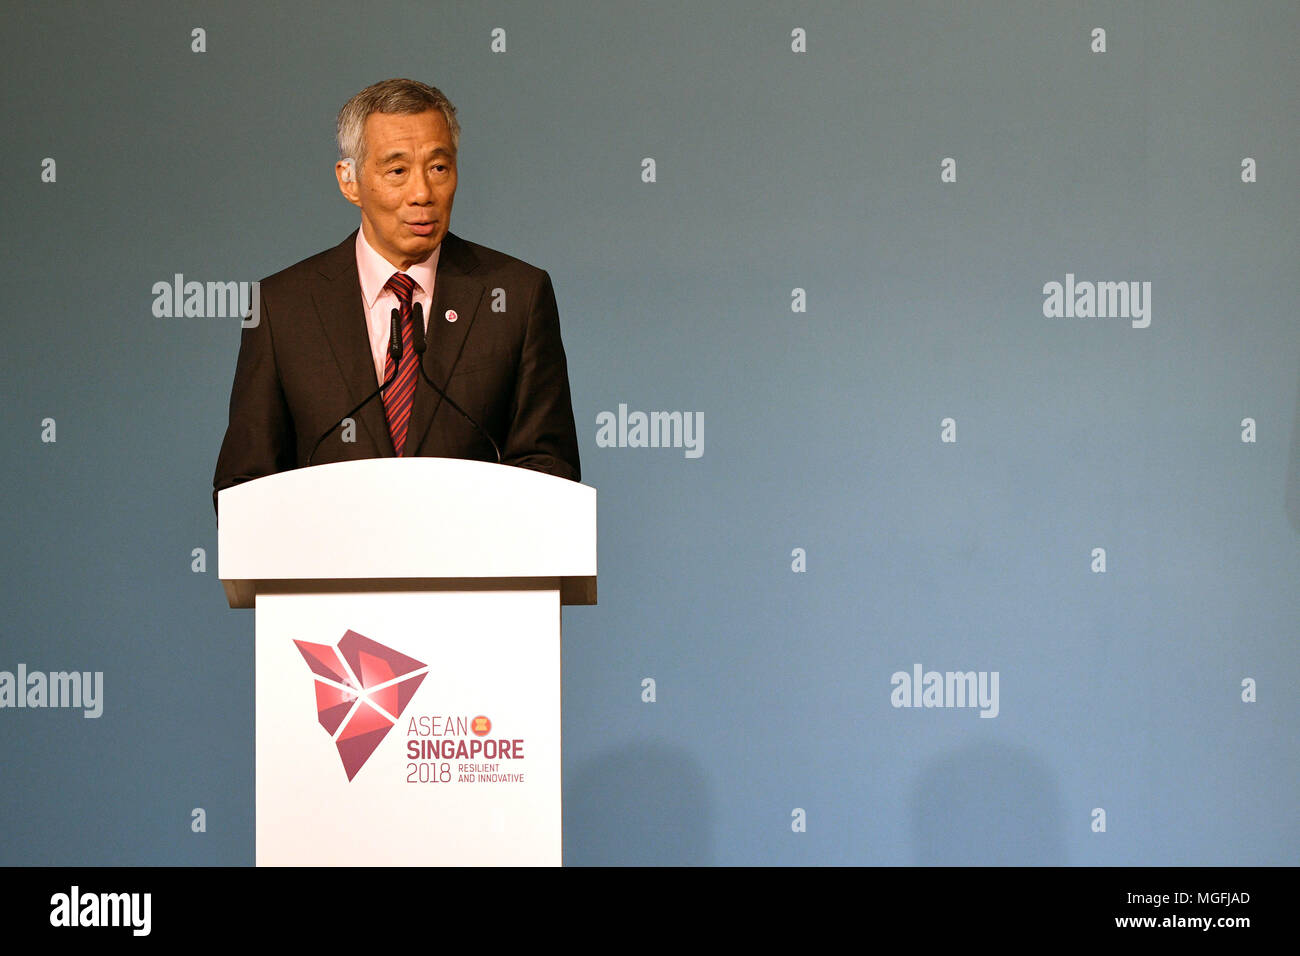 (180428) -- SINGAPORE, April 28, 2018 (Xinhua) -- Singapore's Prime Minister Lee Hsien Loong speaks at the opening ceremony of the 32nd ASEAN Summit held in Singapore on April 28, 2018. The 32nd summit of the Association of Southeast Asian Nations (ASEAN) concluded here Saturday, reaffirming the bloc's cooperation and common vision. (Xinhua/Then Chih Wey) (srb) Stock Photo